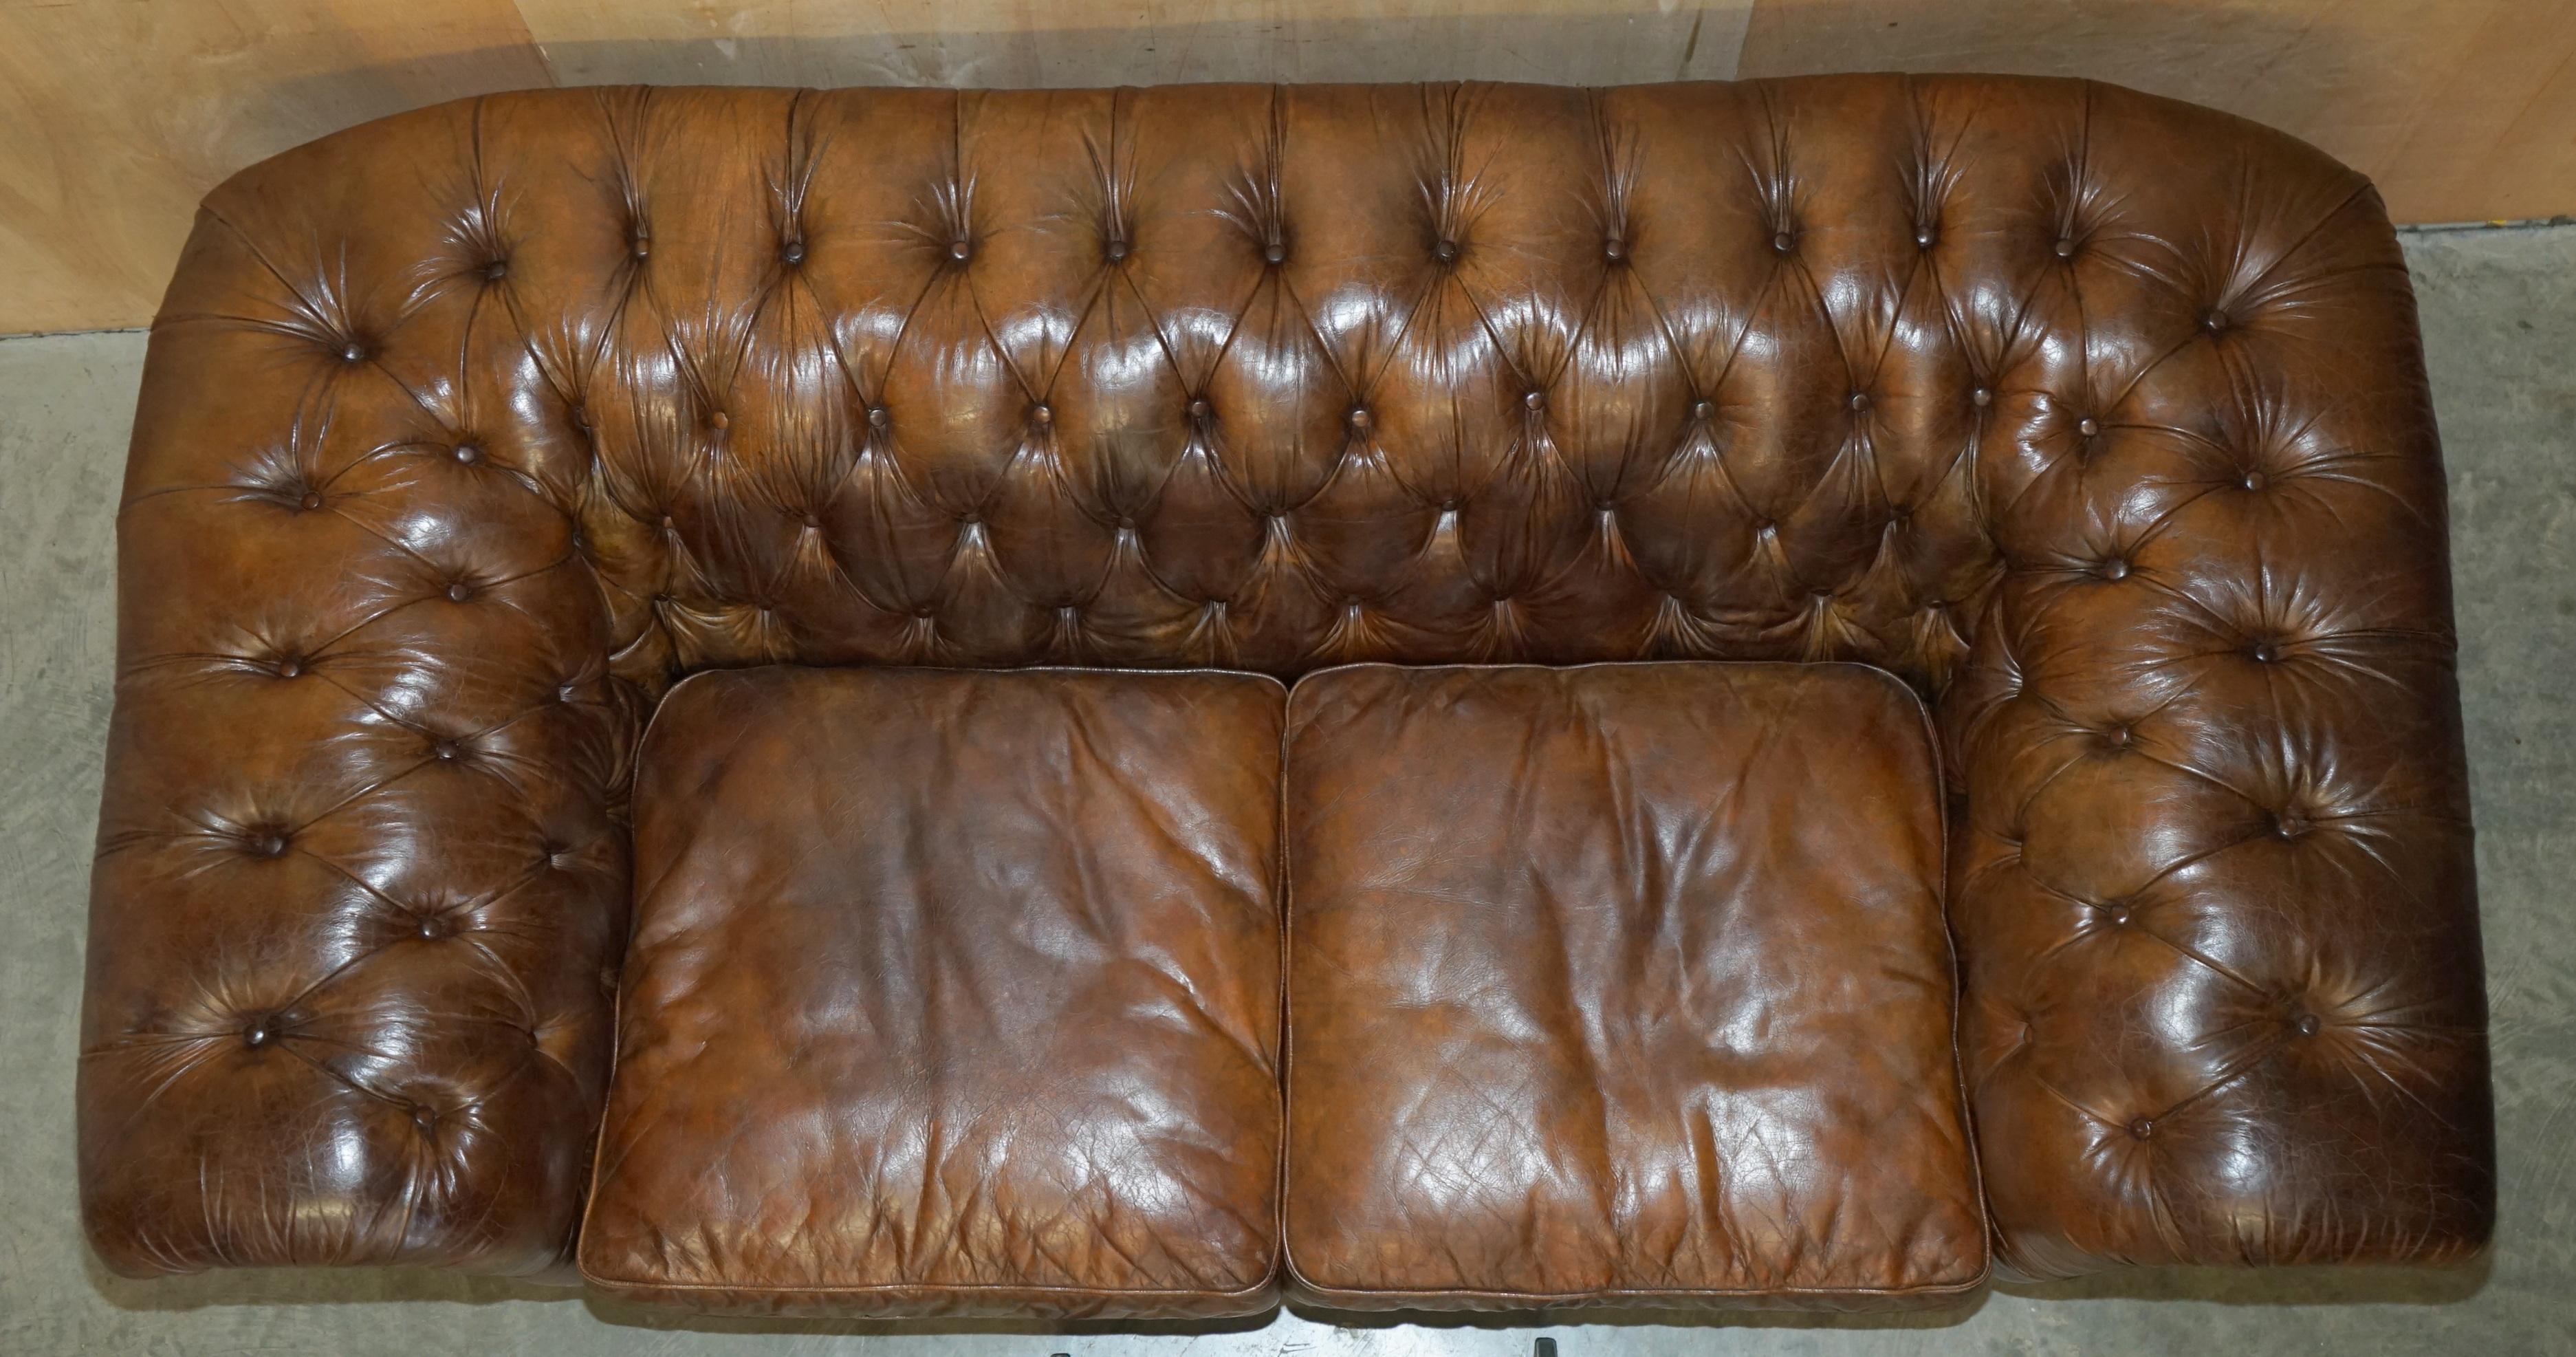 20th Century 1 OF 2 TIMOTHY OULTON HERITAGE BROWN OVERSIZED LEATHER CHESTERFIELD HALO SOFAs For Sale